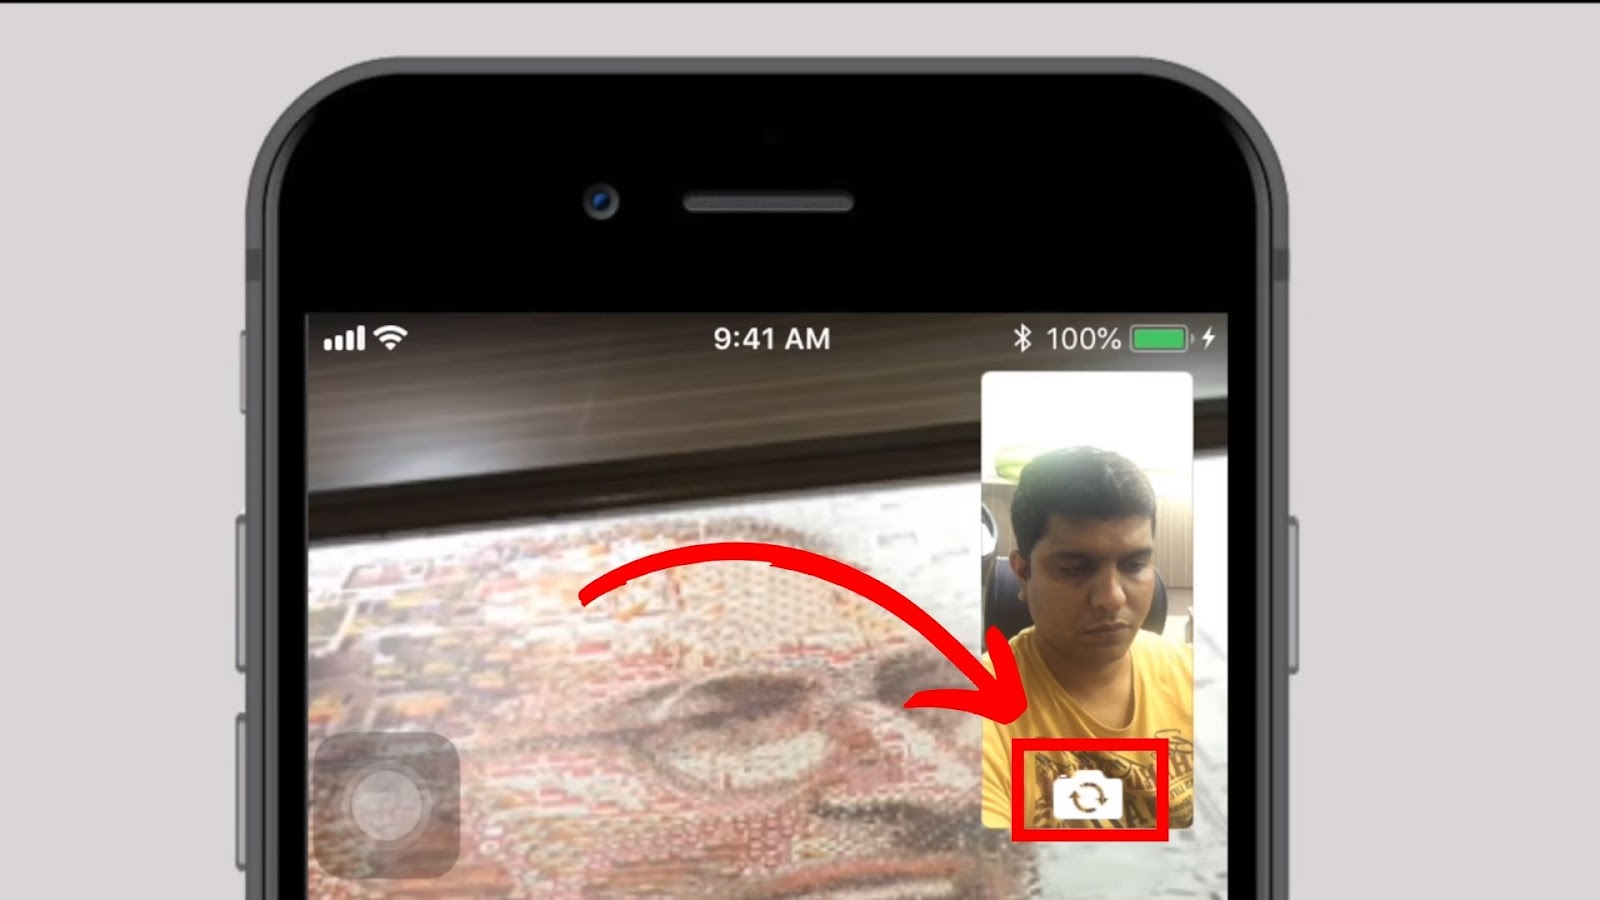 How to Flip FaceTime Camera - Tap the Flip Icon